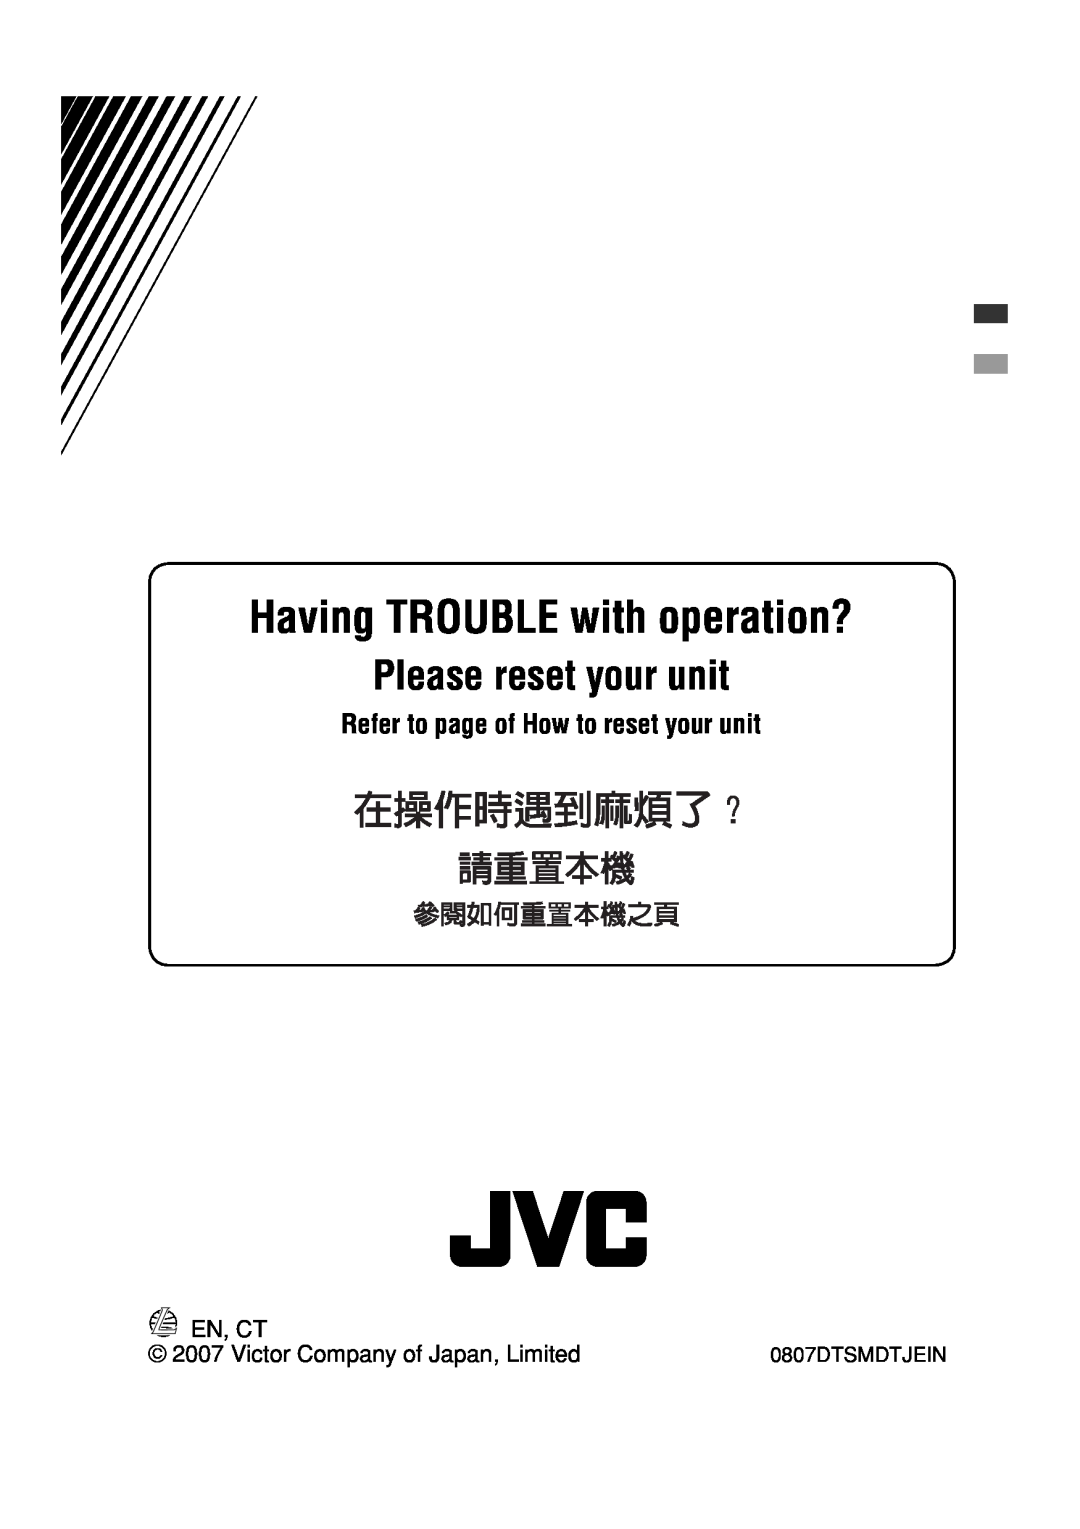 JVC MA372IEN En, Ct, Having TROUBLE with operation?, Please reset your unit, Refer to page of How to reset your unit 